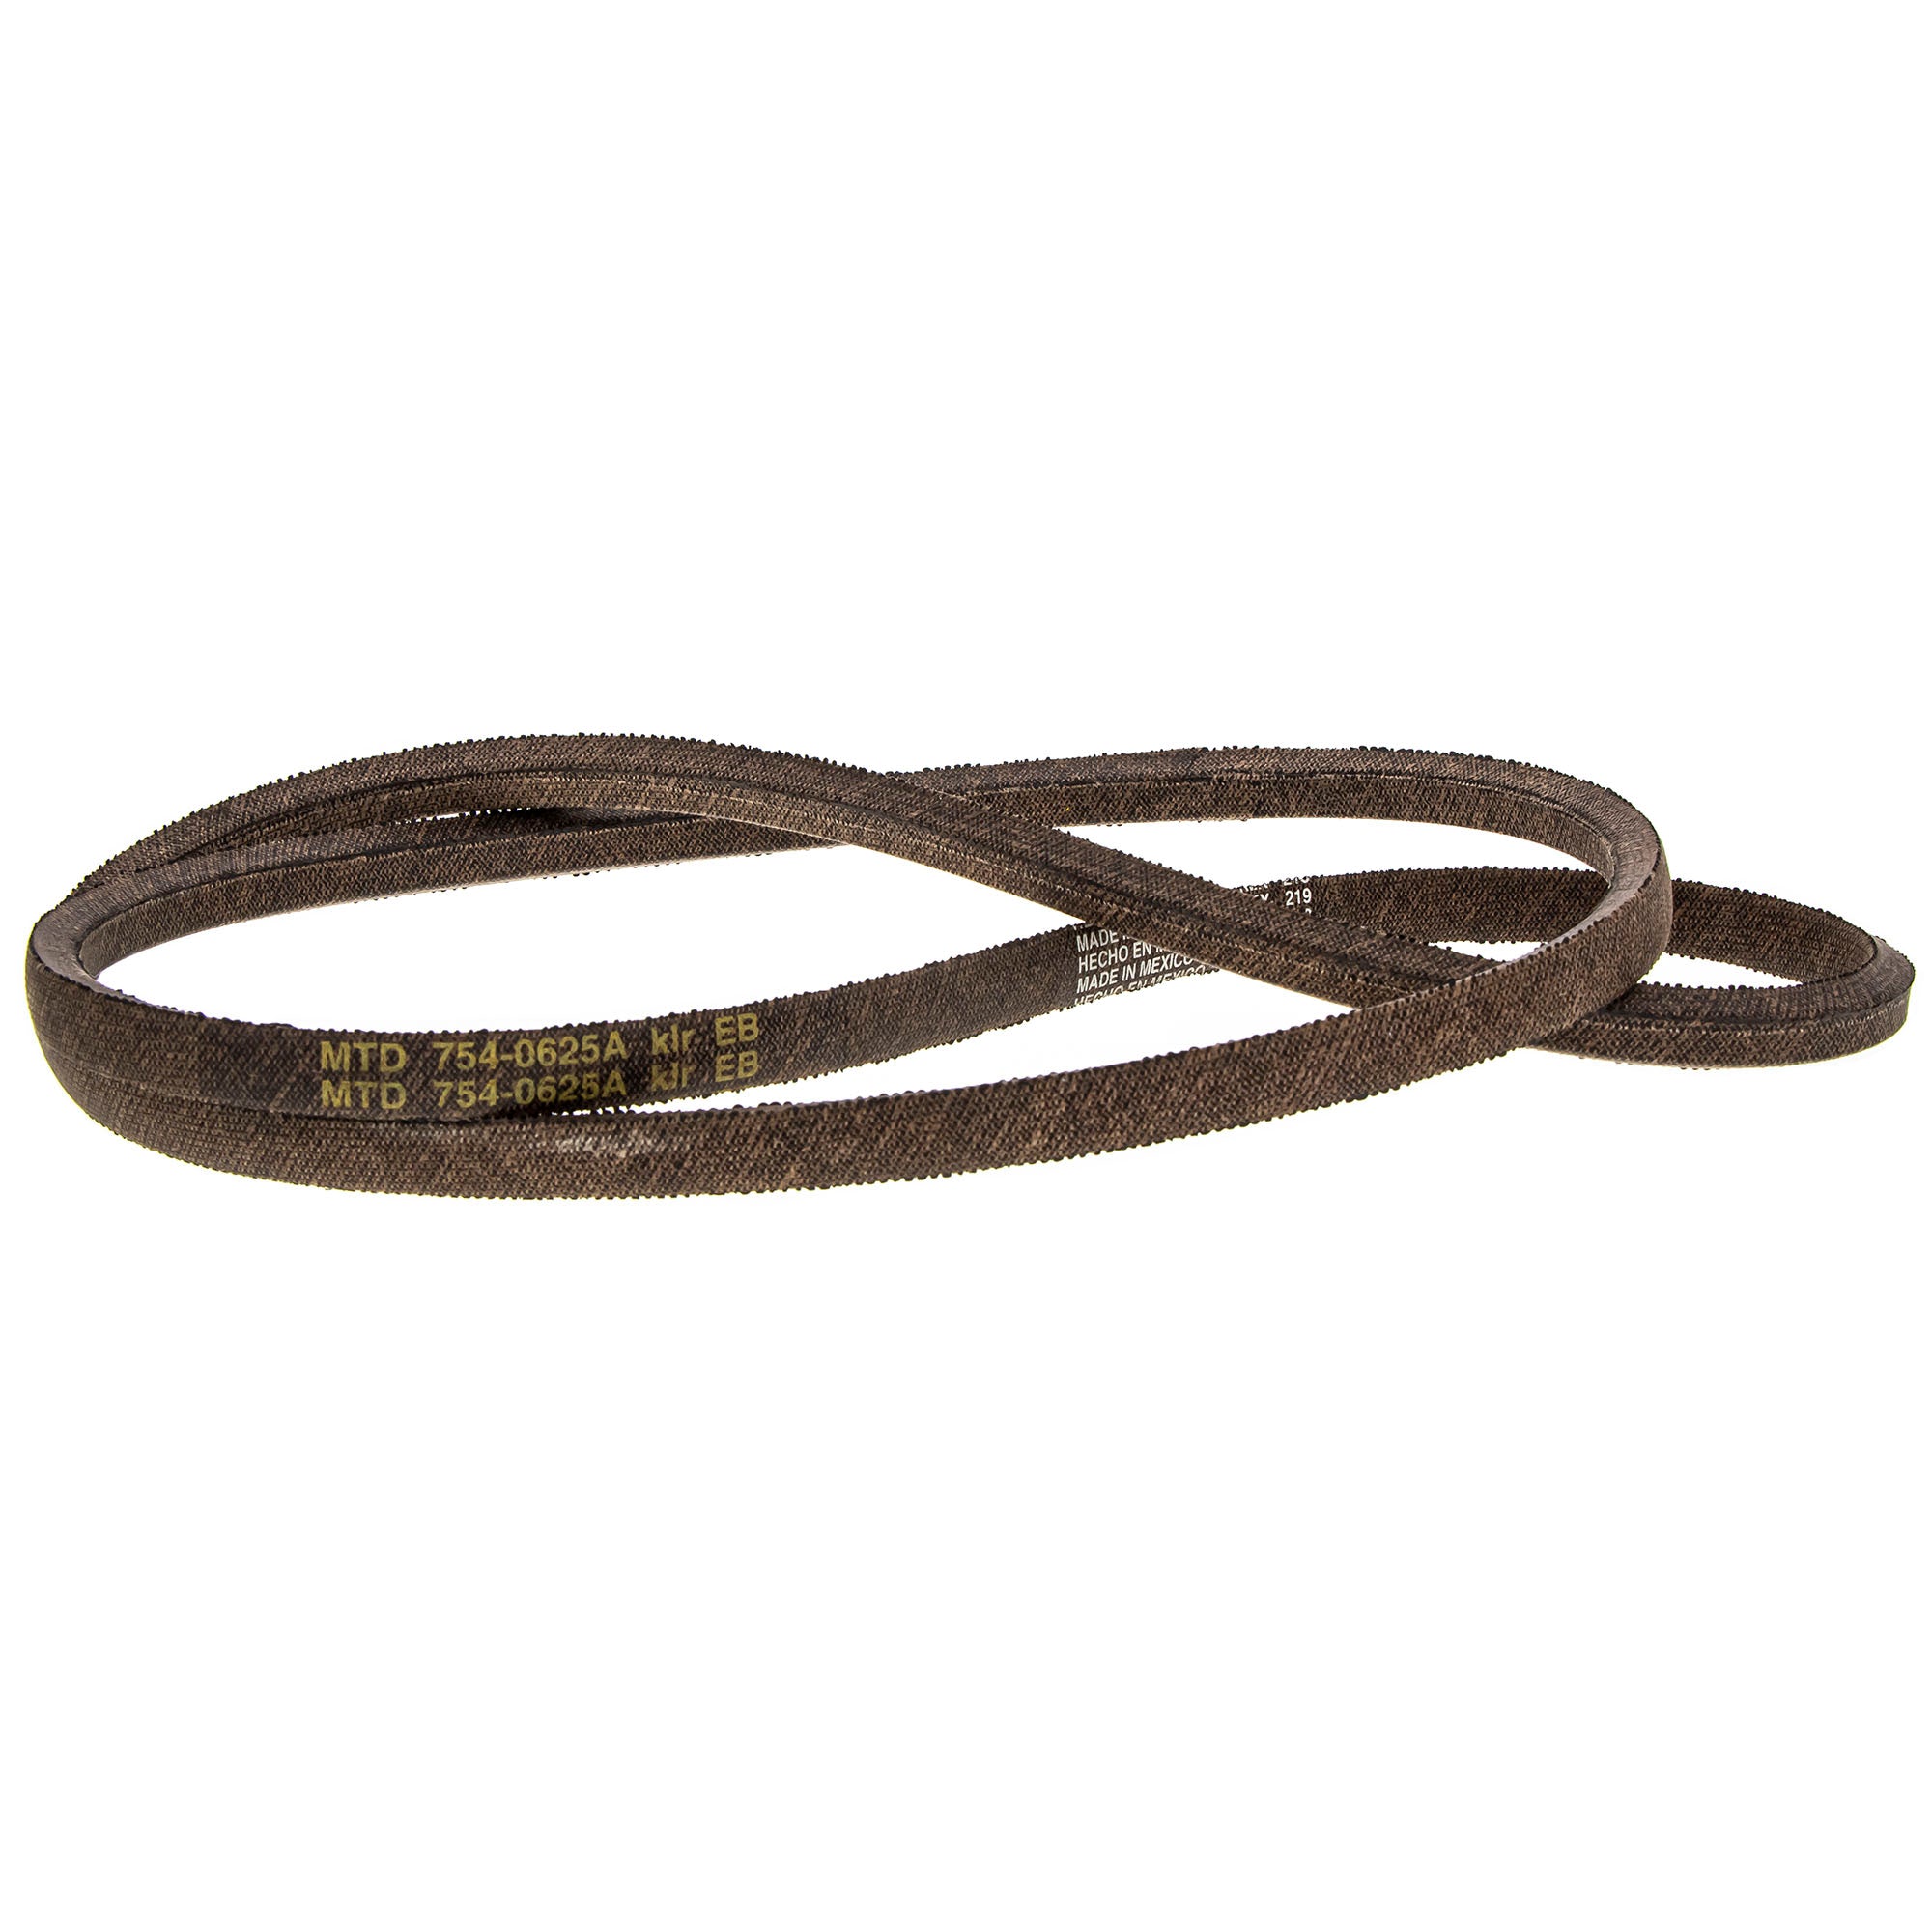 Line Trimmer Drive Belt (replaces 754-0489, 754-0625A, 954-0625